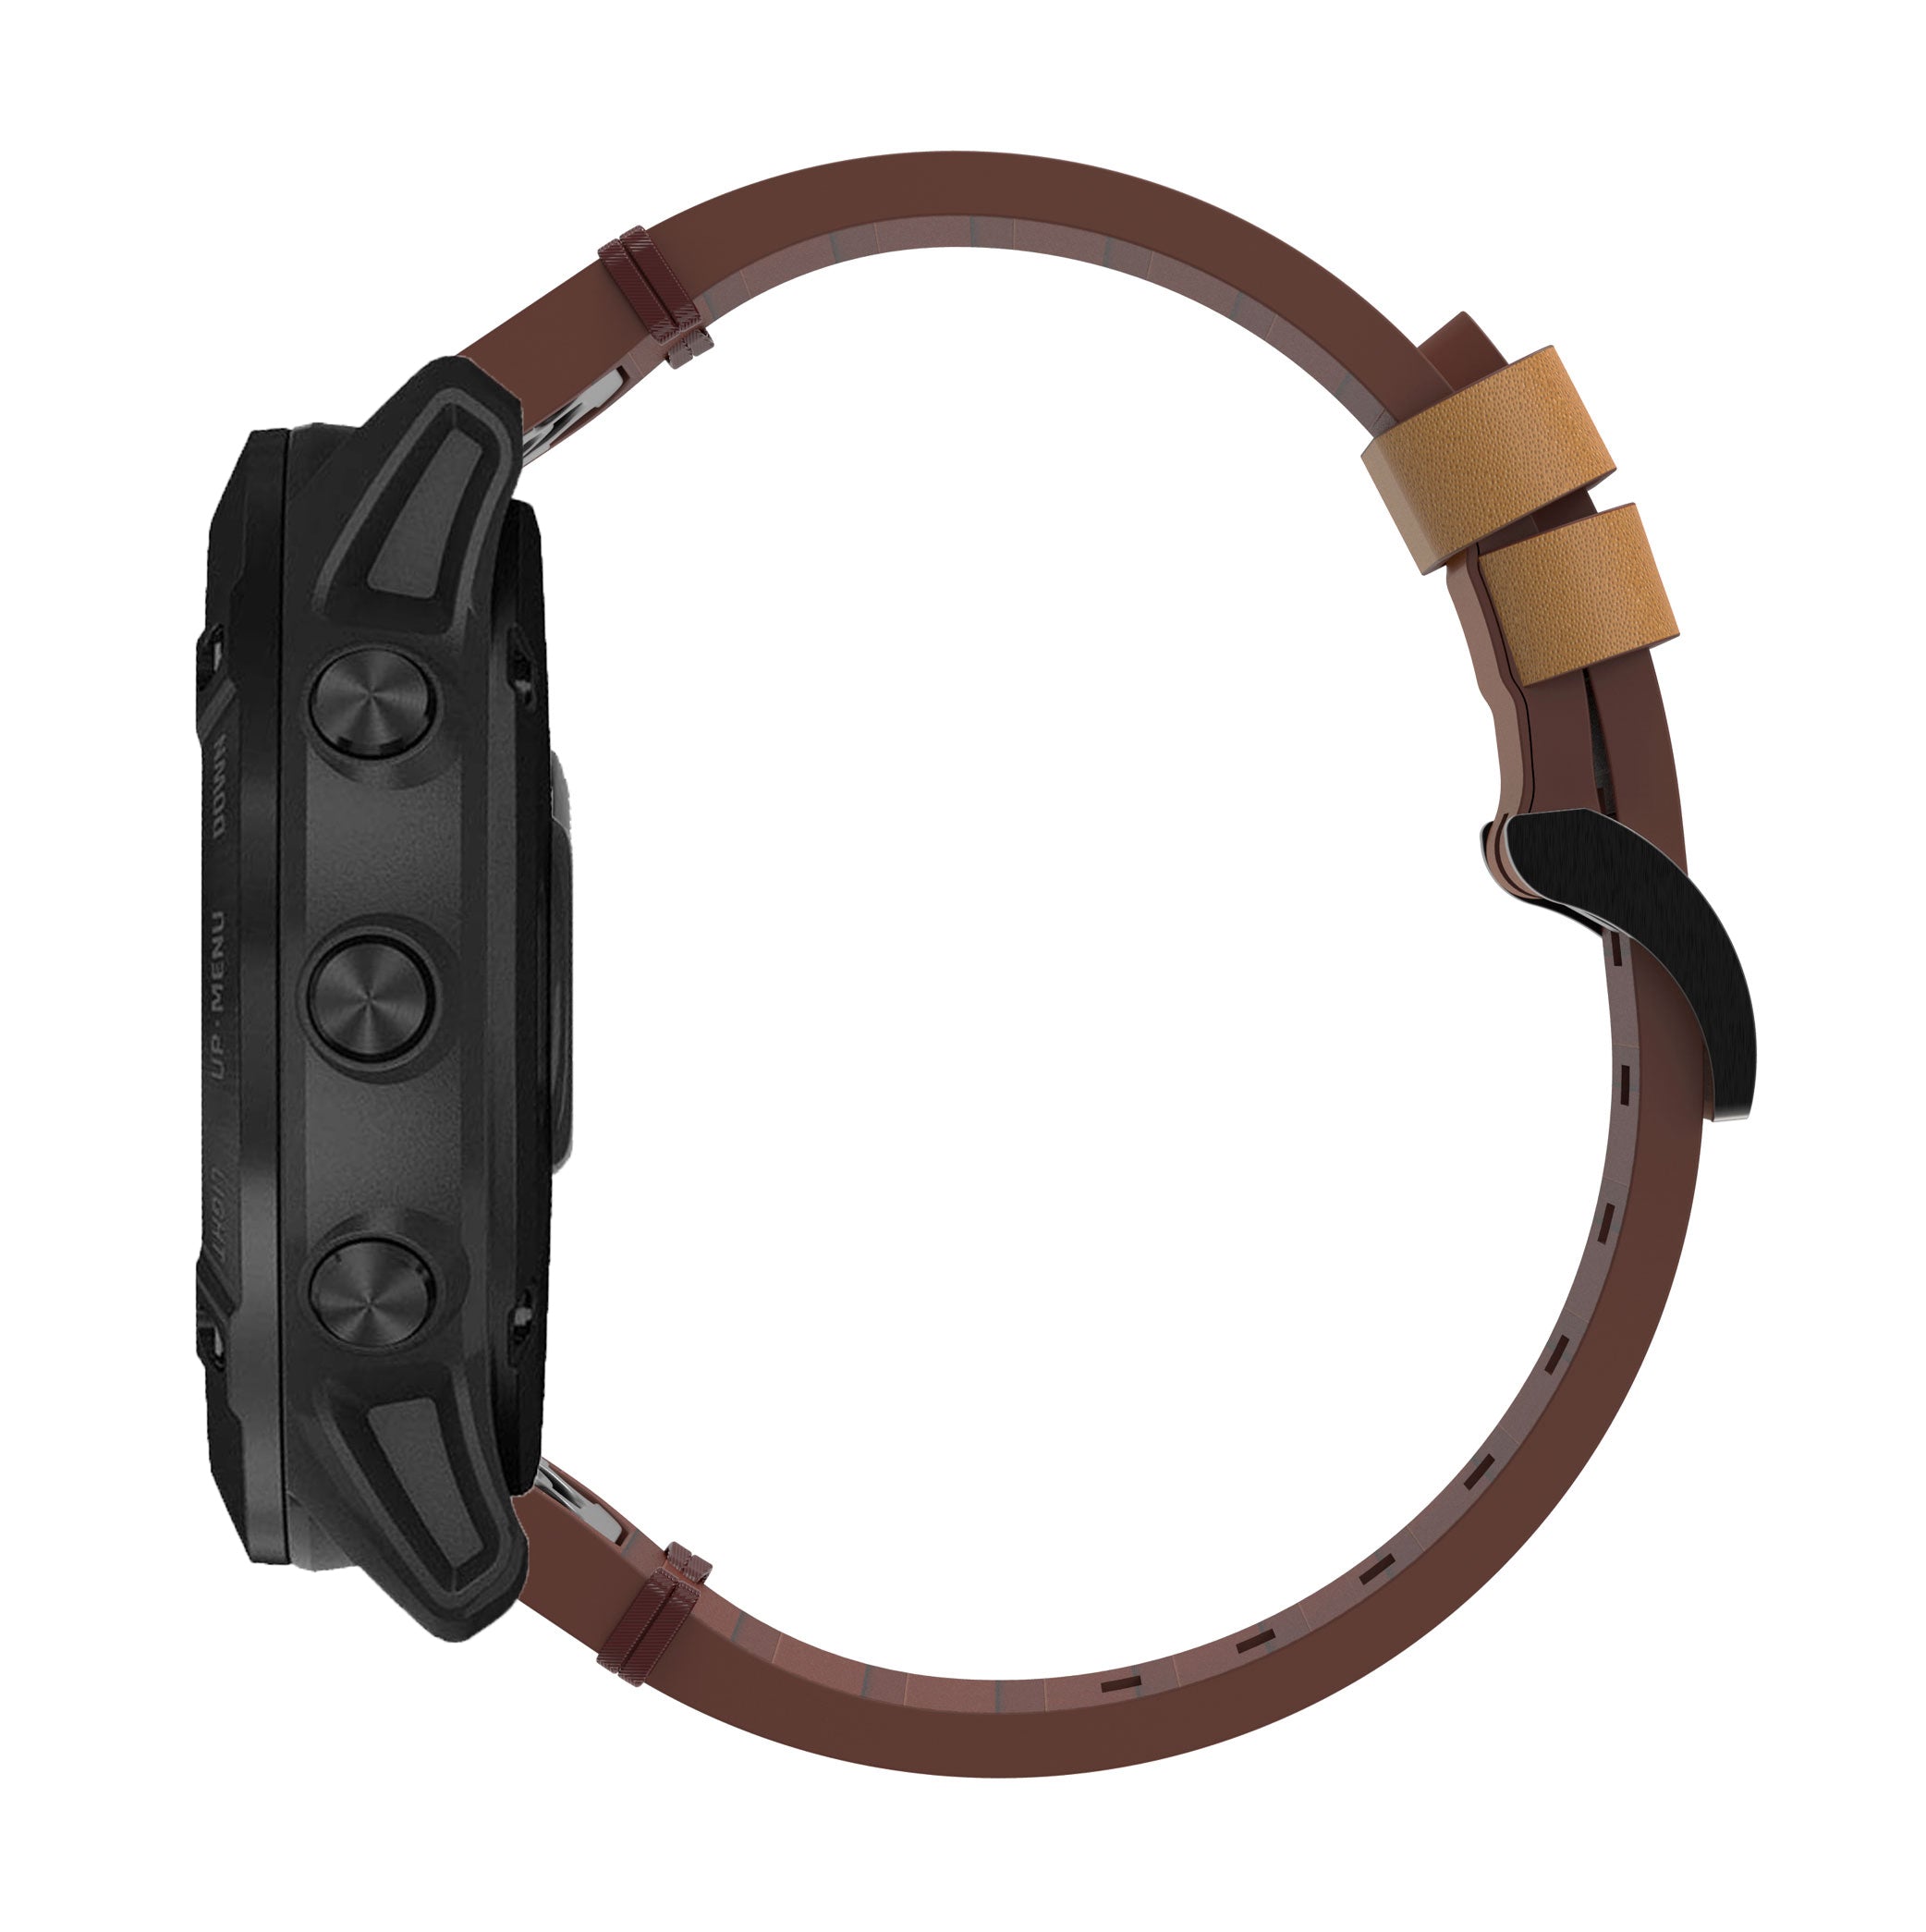 [QuickFit] Leather - Brown 26mm